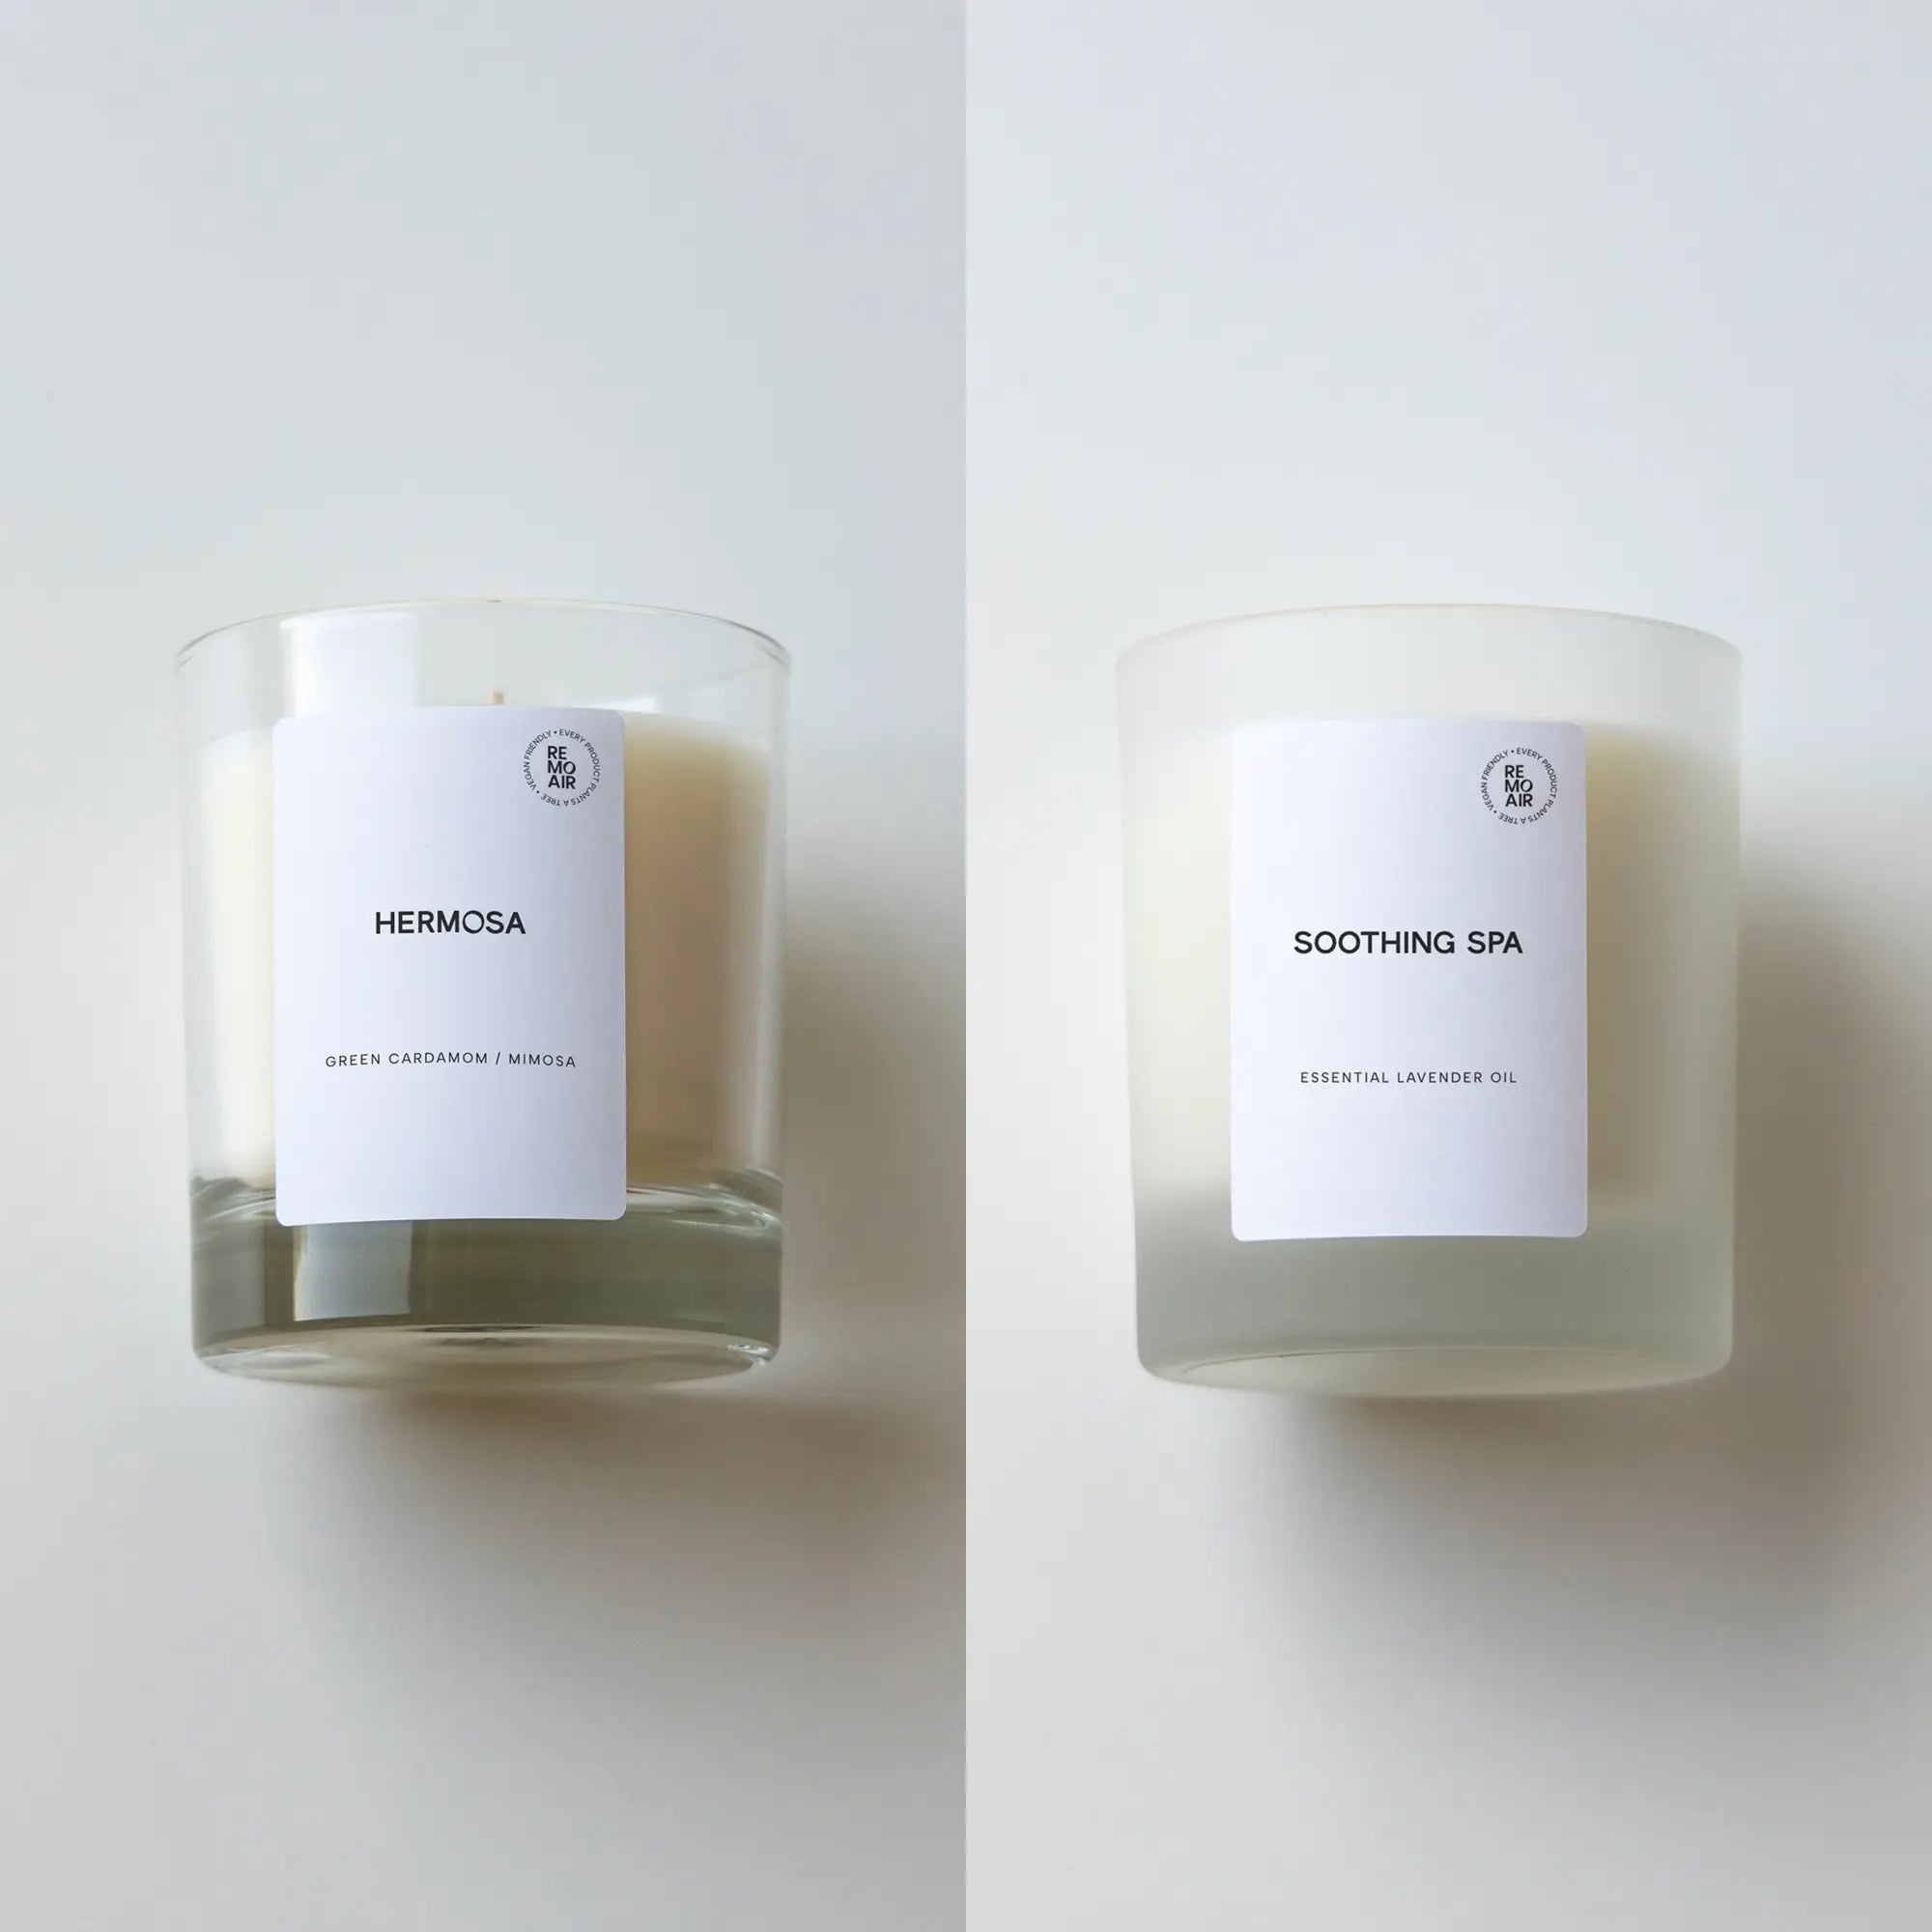 DUO - Hermosa + Soothing Spa